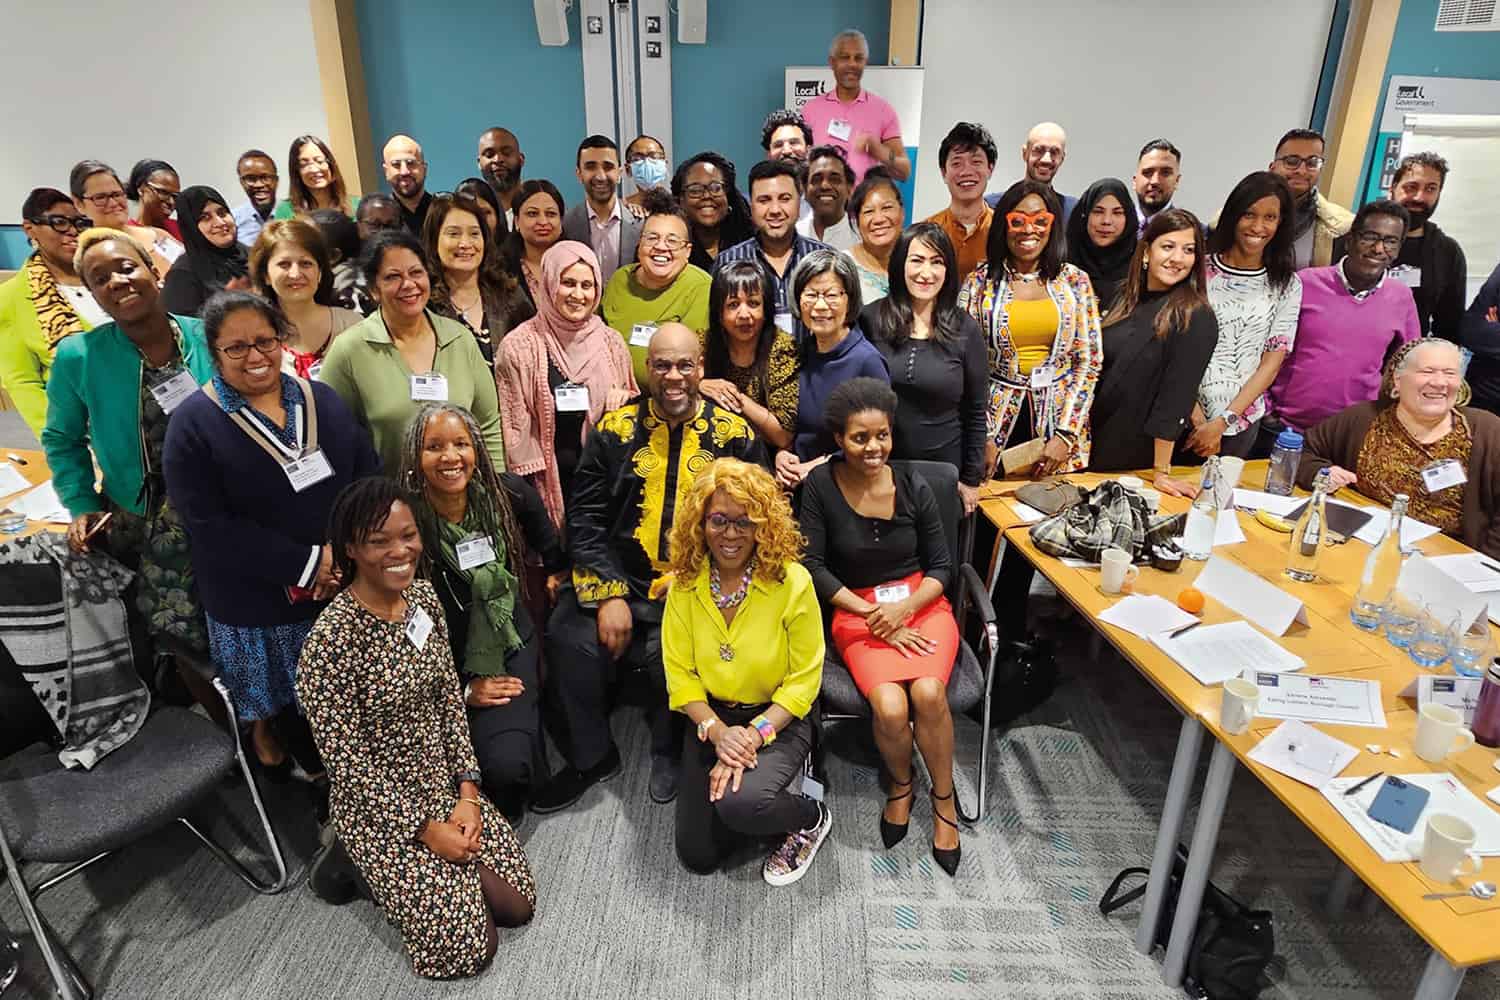 group photo of participants at an LGA weekender event for black, Asian and ethnic minority councillors